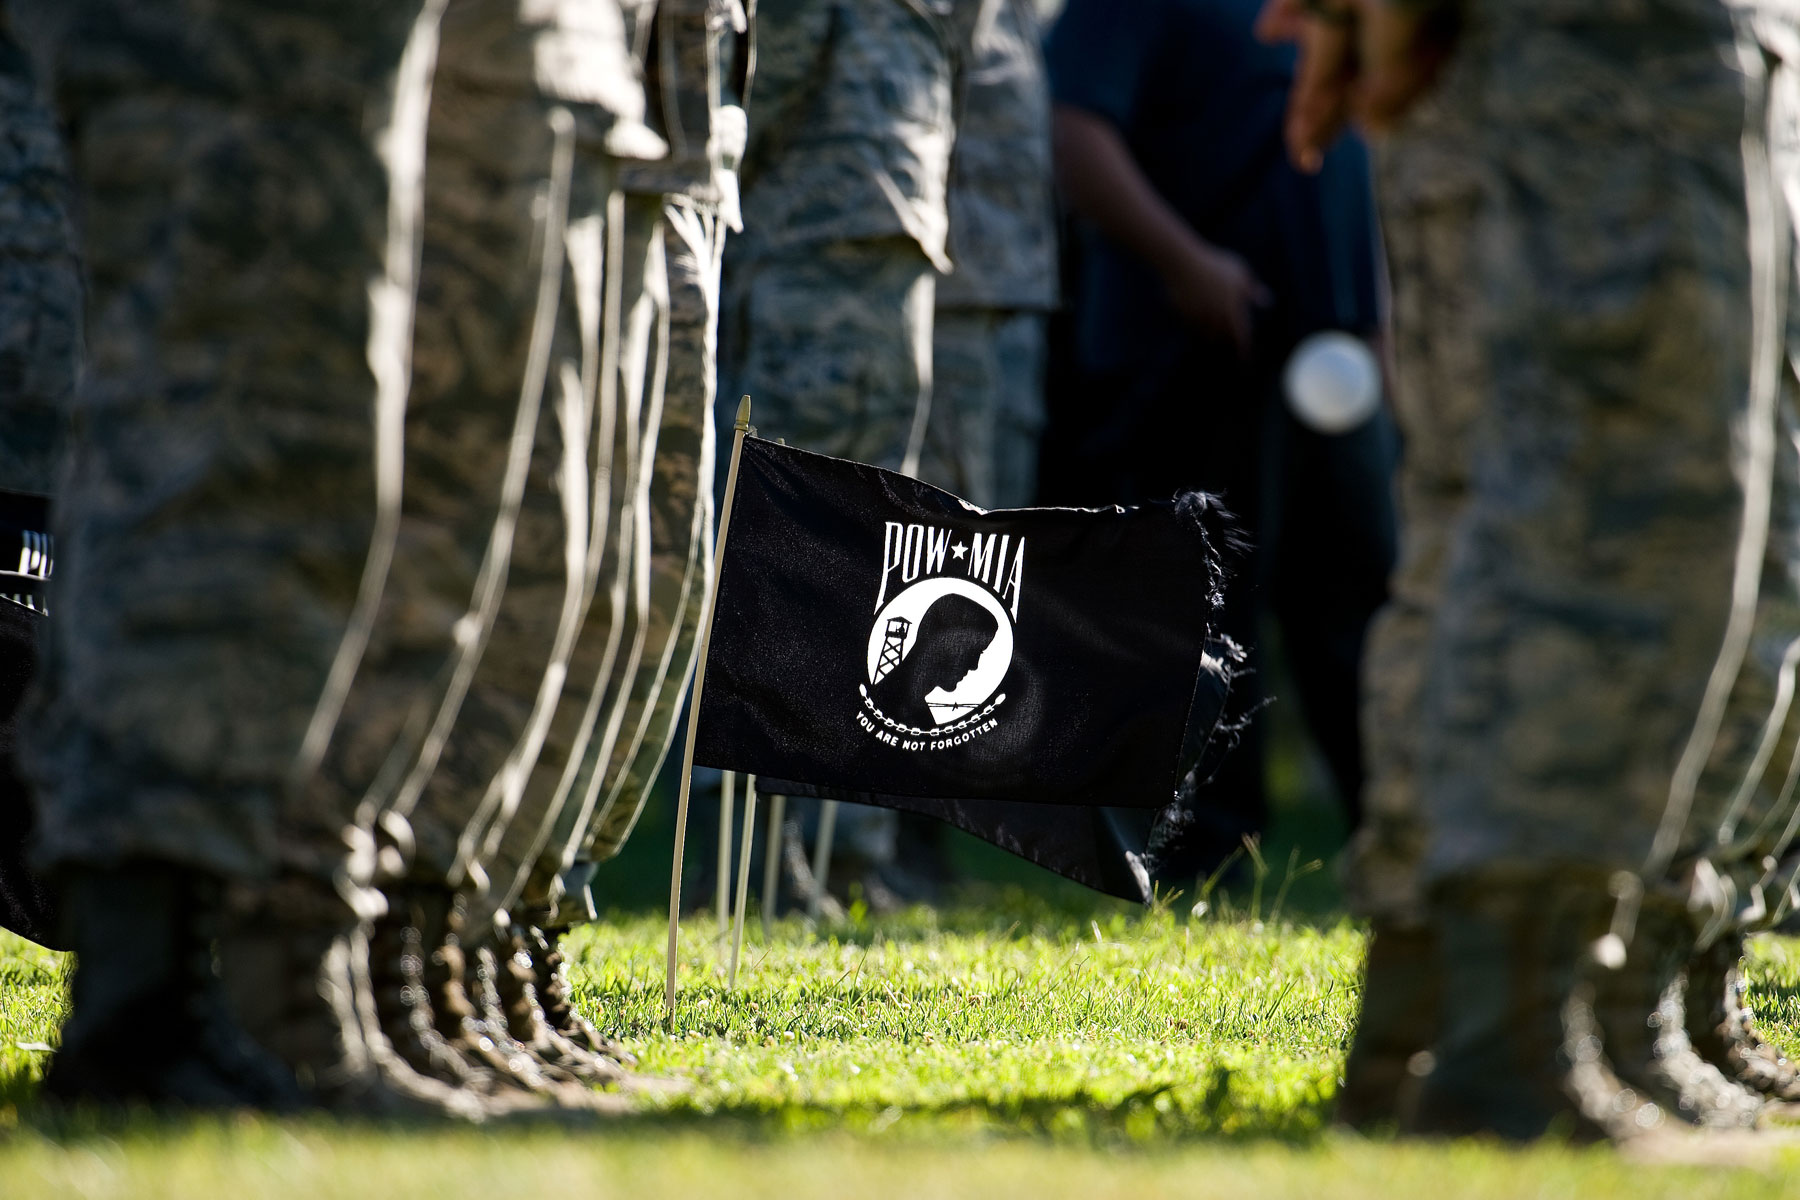 Twenty POW/MIA flags wave in a steady breeze during a retreat ceremony commemorating National POW/MIA Recognition Day Sept. 16, 2016, on Dover Air Force Base, Del. (U.S. Air Force photo by Roland Balik)